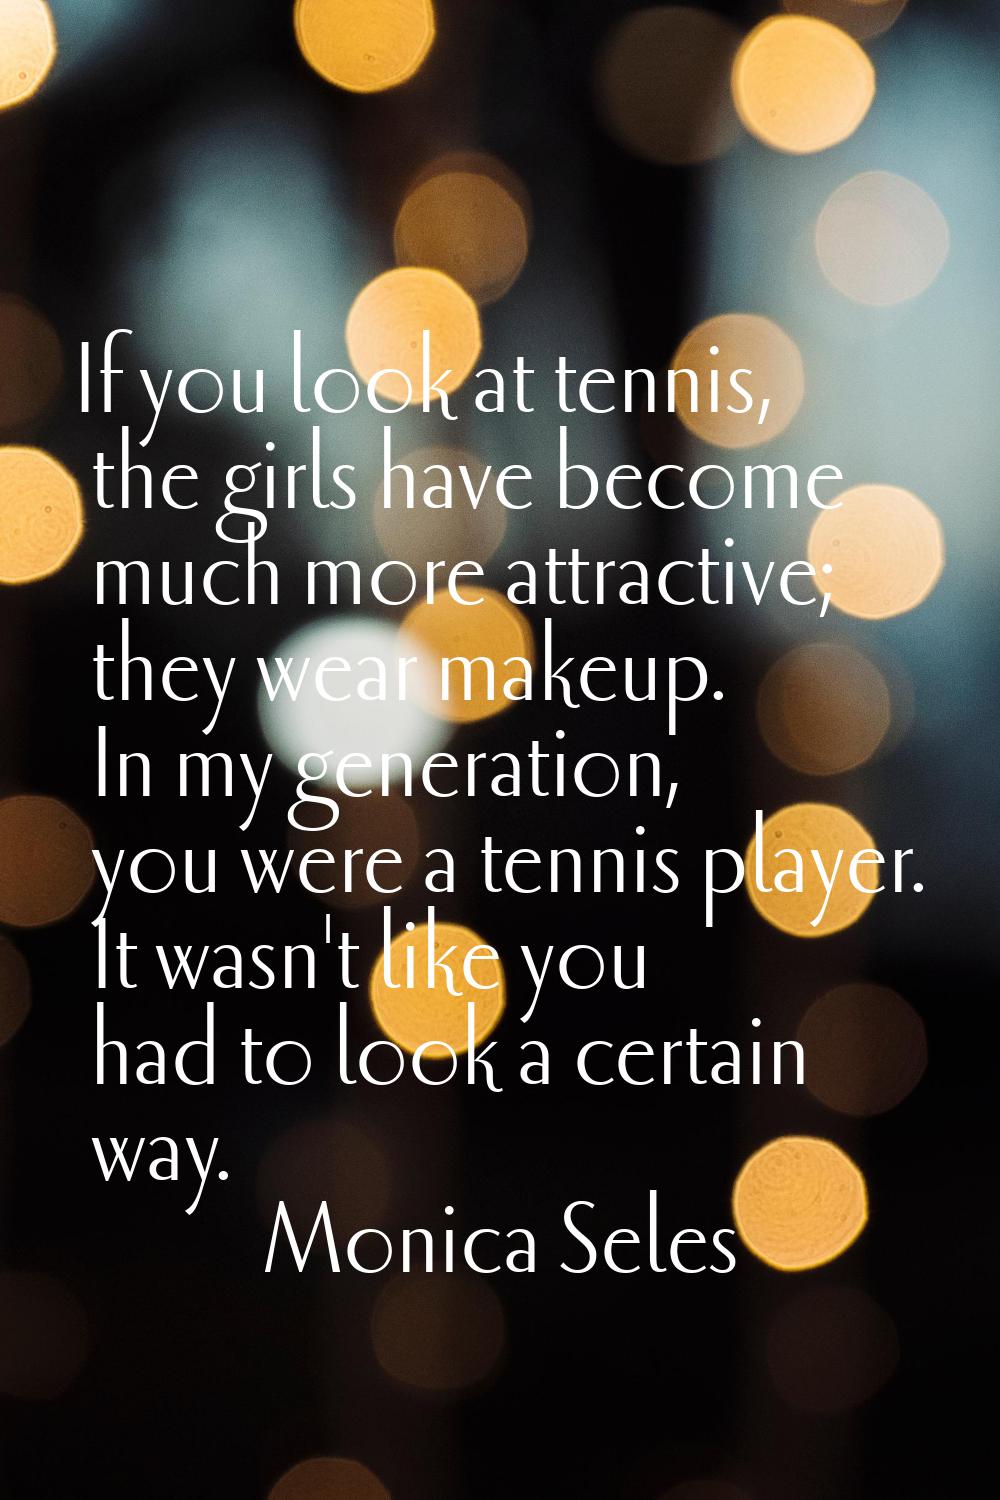 If you look at tennis, the girls have become much more attractive; they wear makeup. In my generati